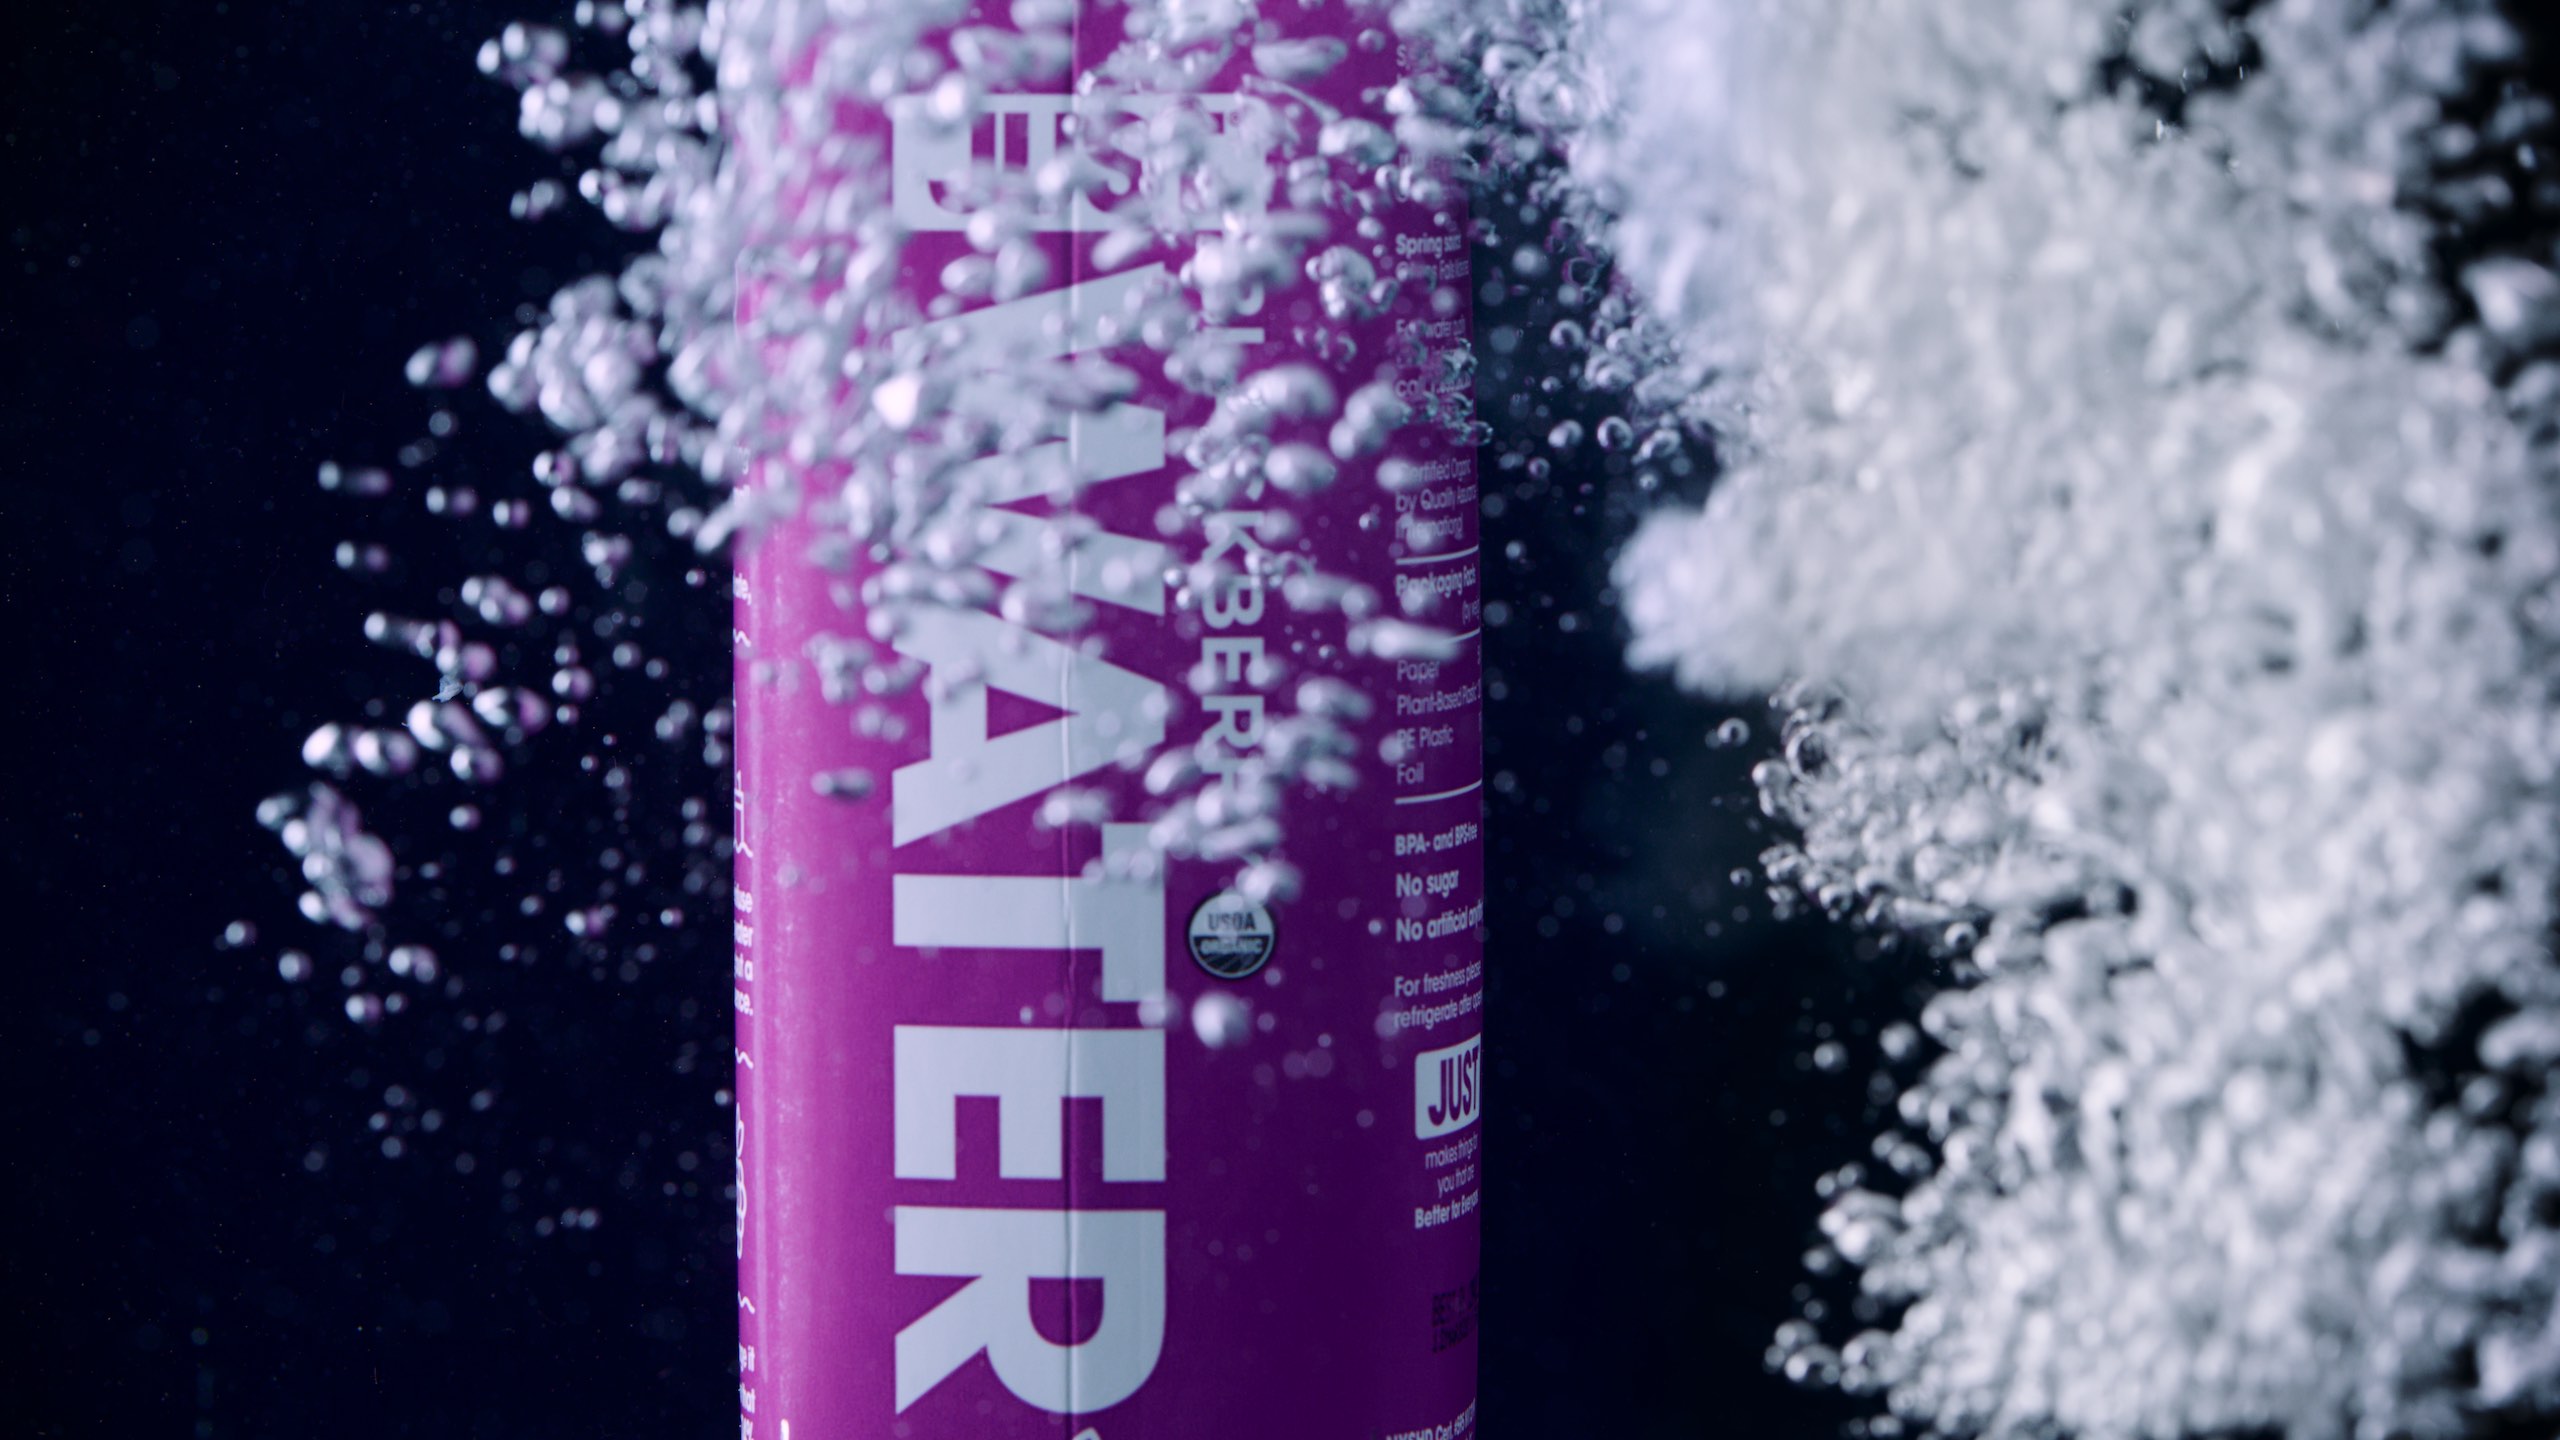 Just water video ad Purple container of spring water on display with bubbles